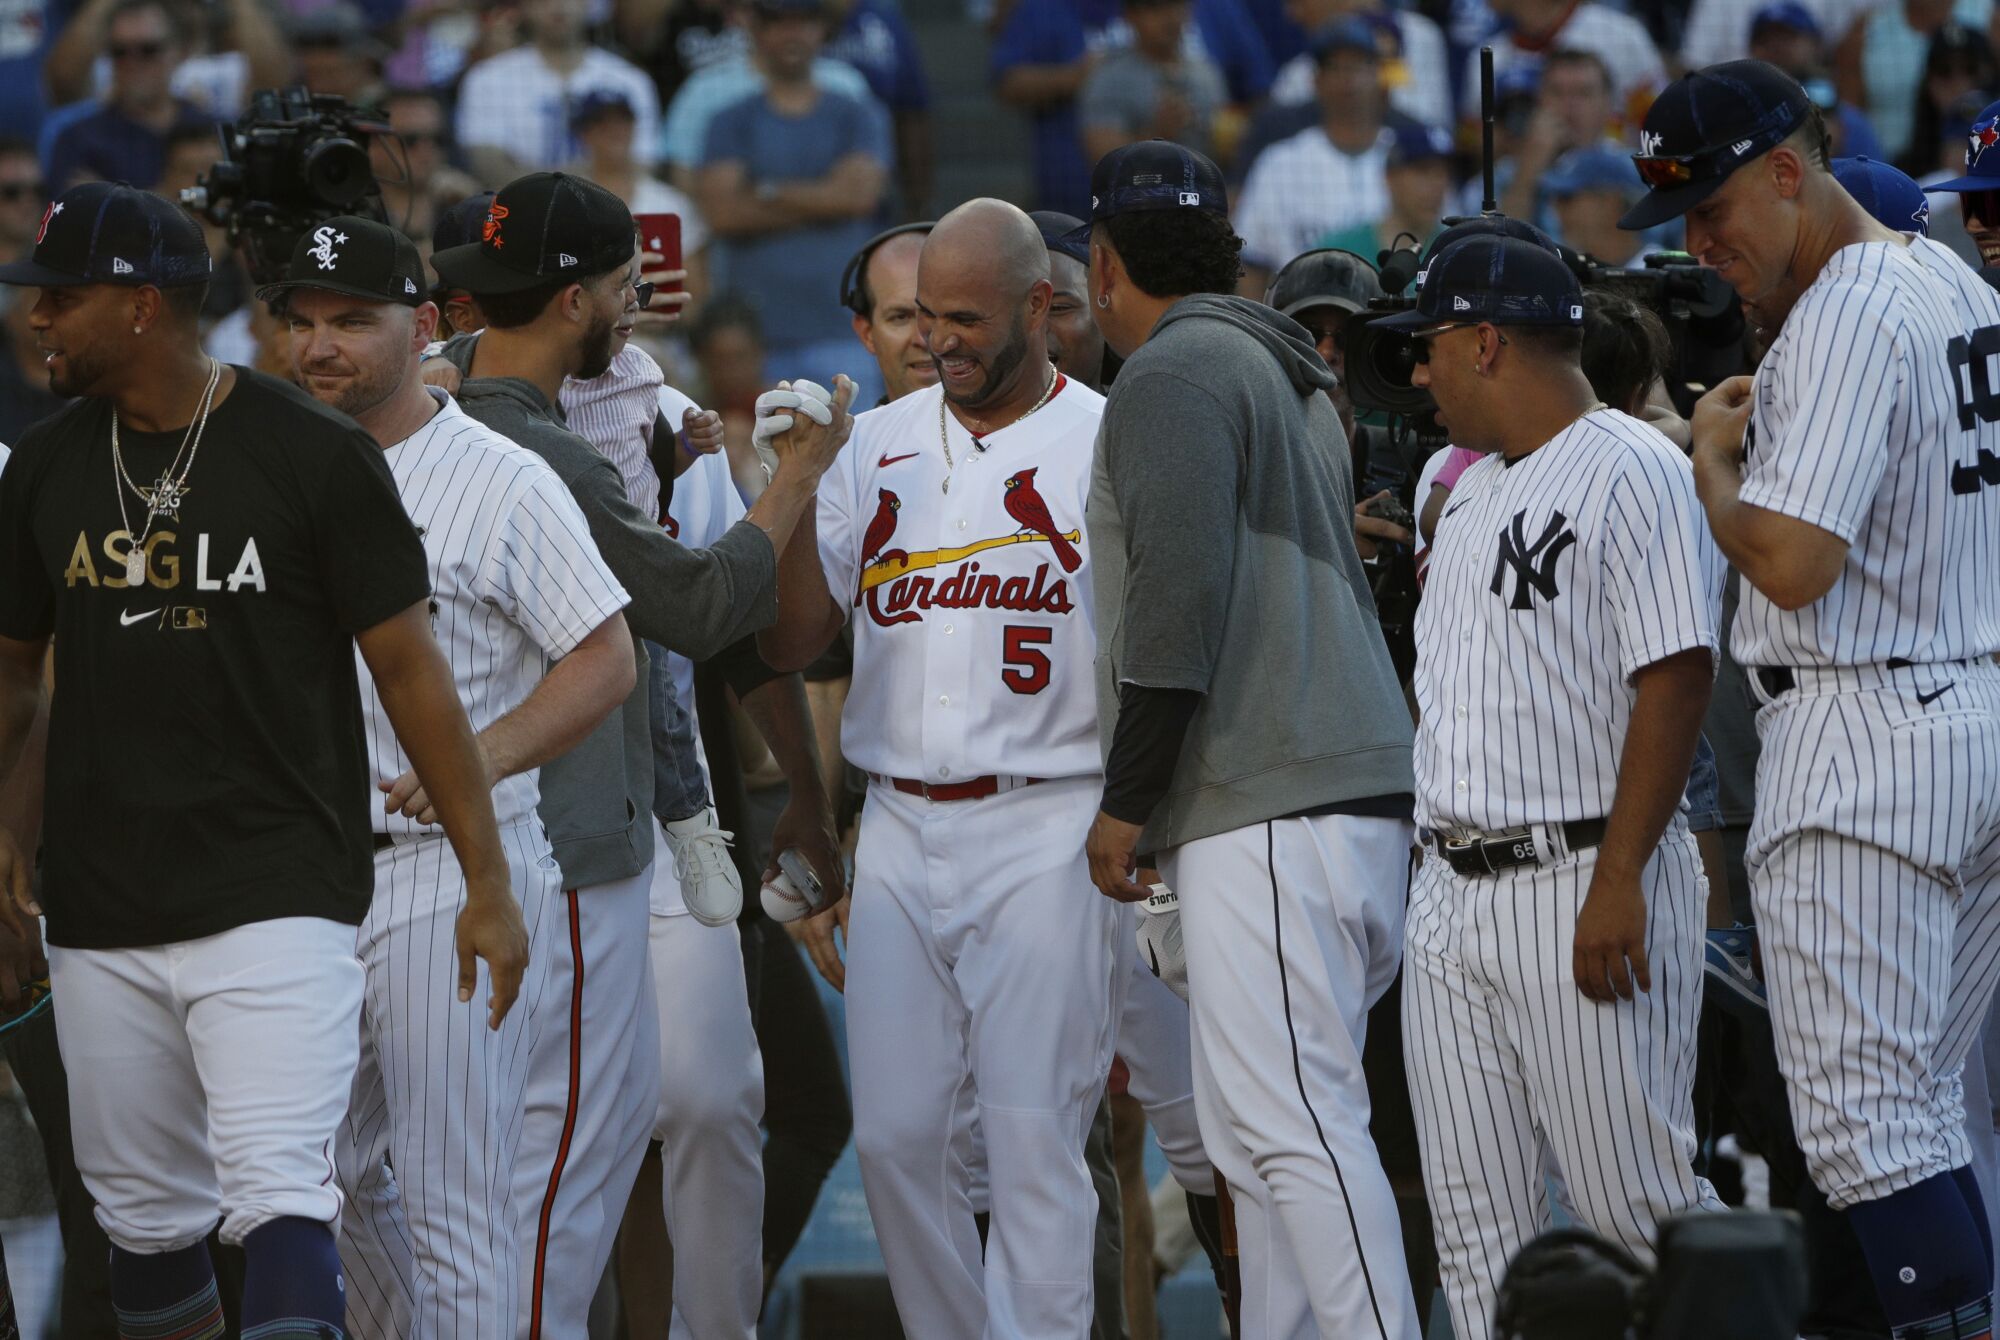 All-Stars honor Albert Pujols (5) during the home run derby at Dodger Stadium on July 18, 2022.